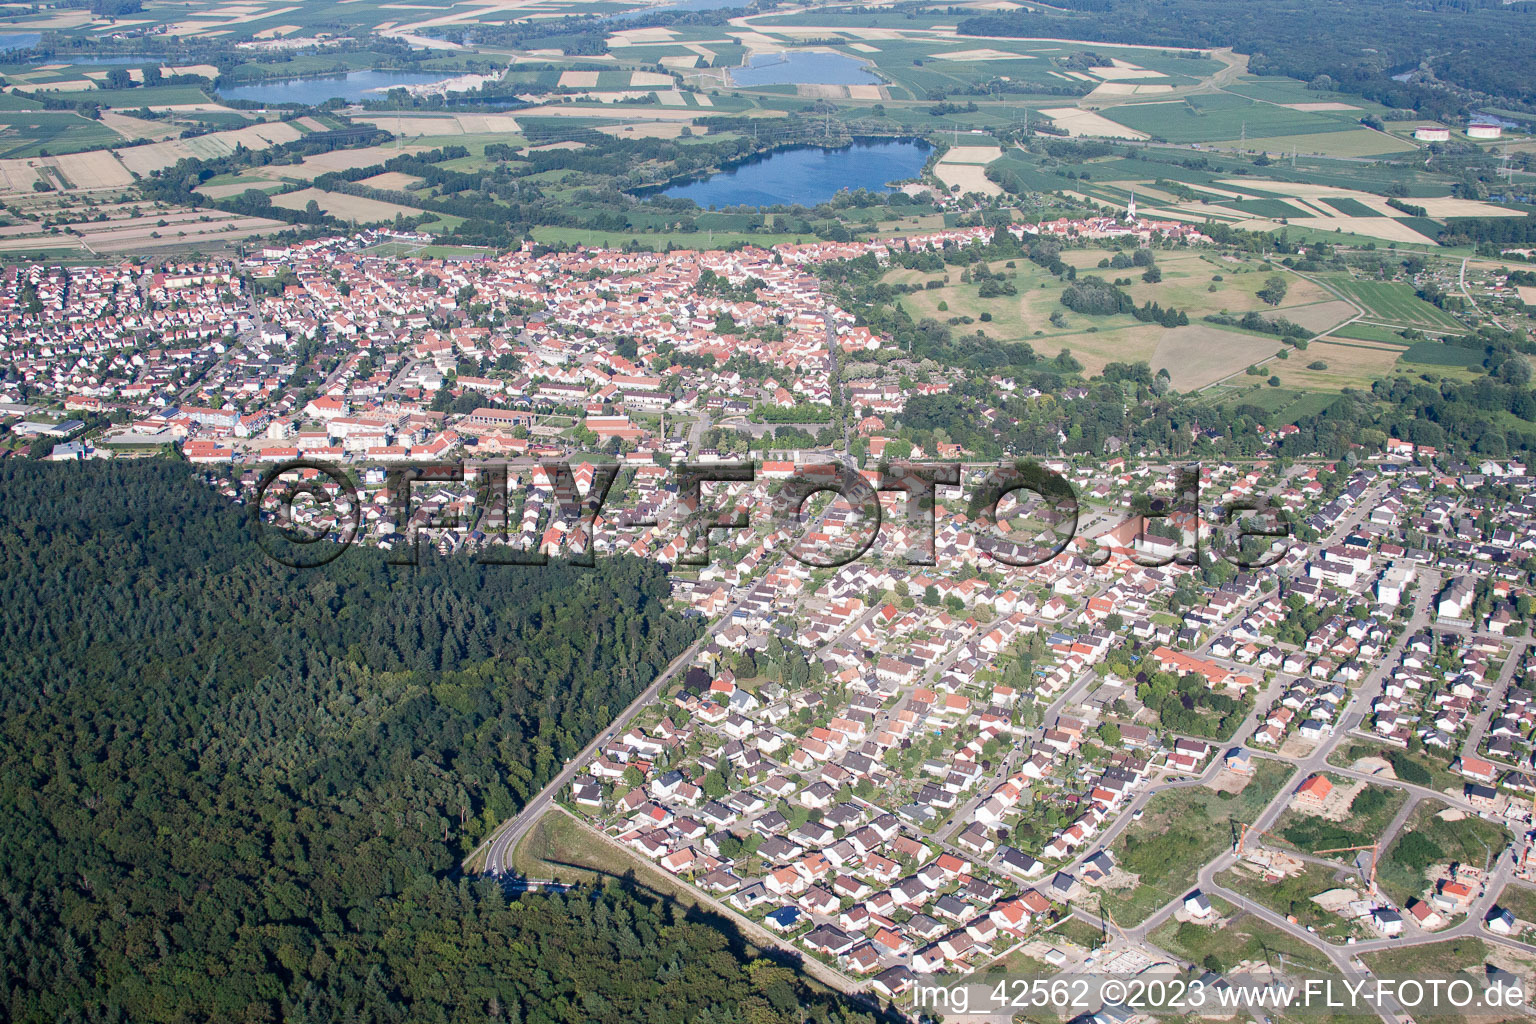 From northwest in Jockgrim in the state Rhineland-Palatinate, Germany